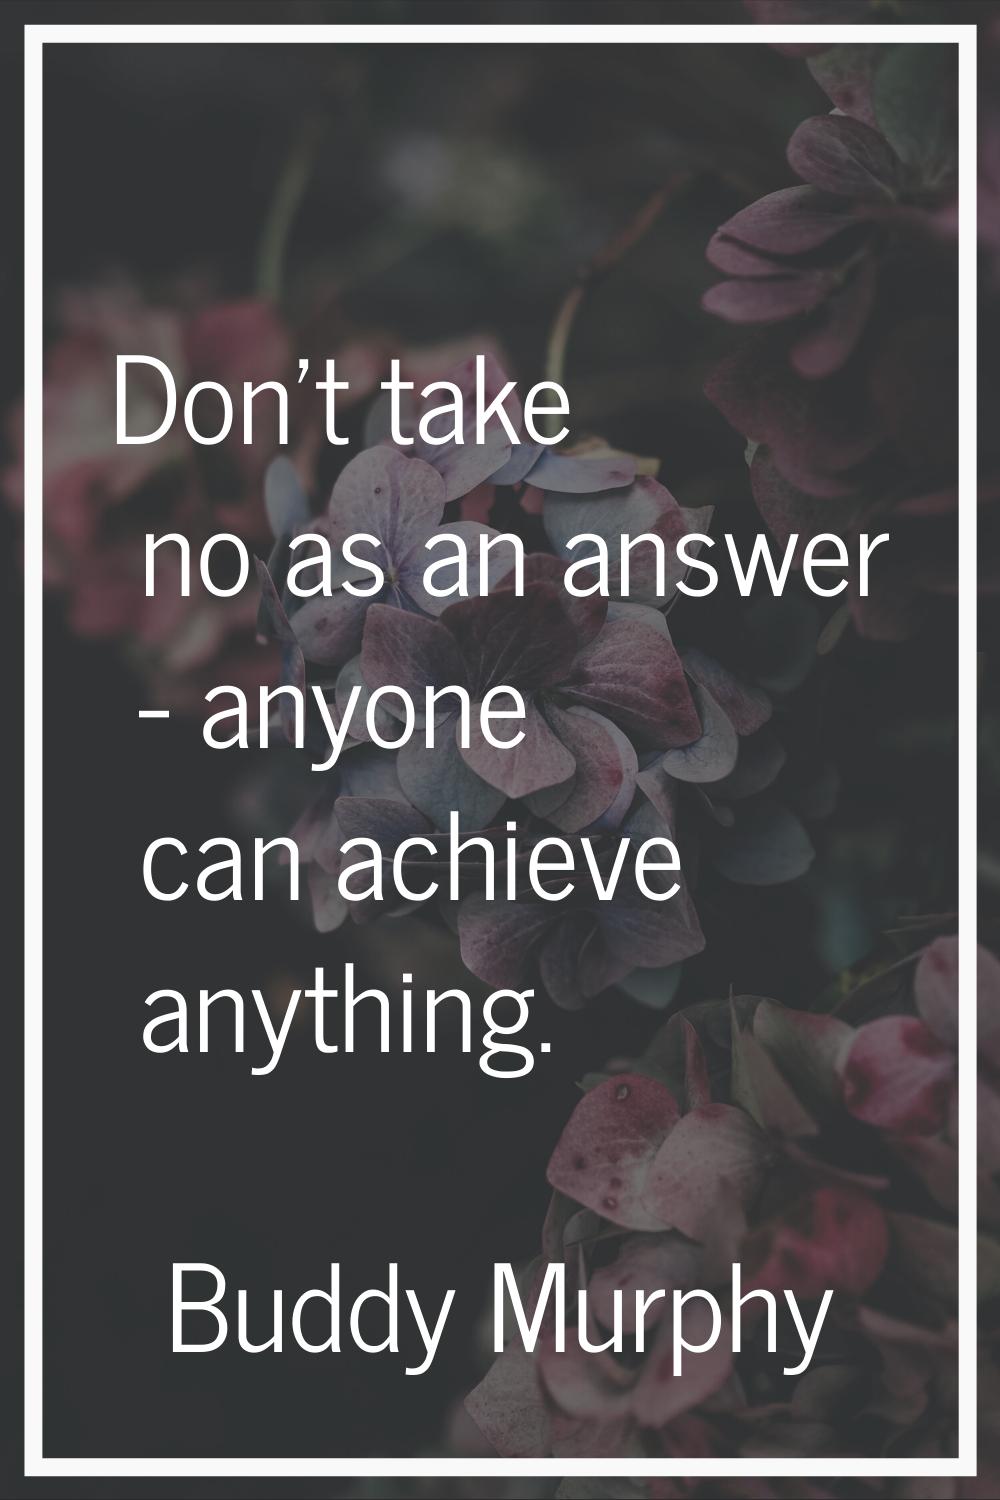 Don't take no as an answer - anyone can achieve anything.